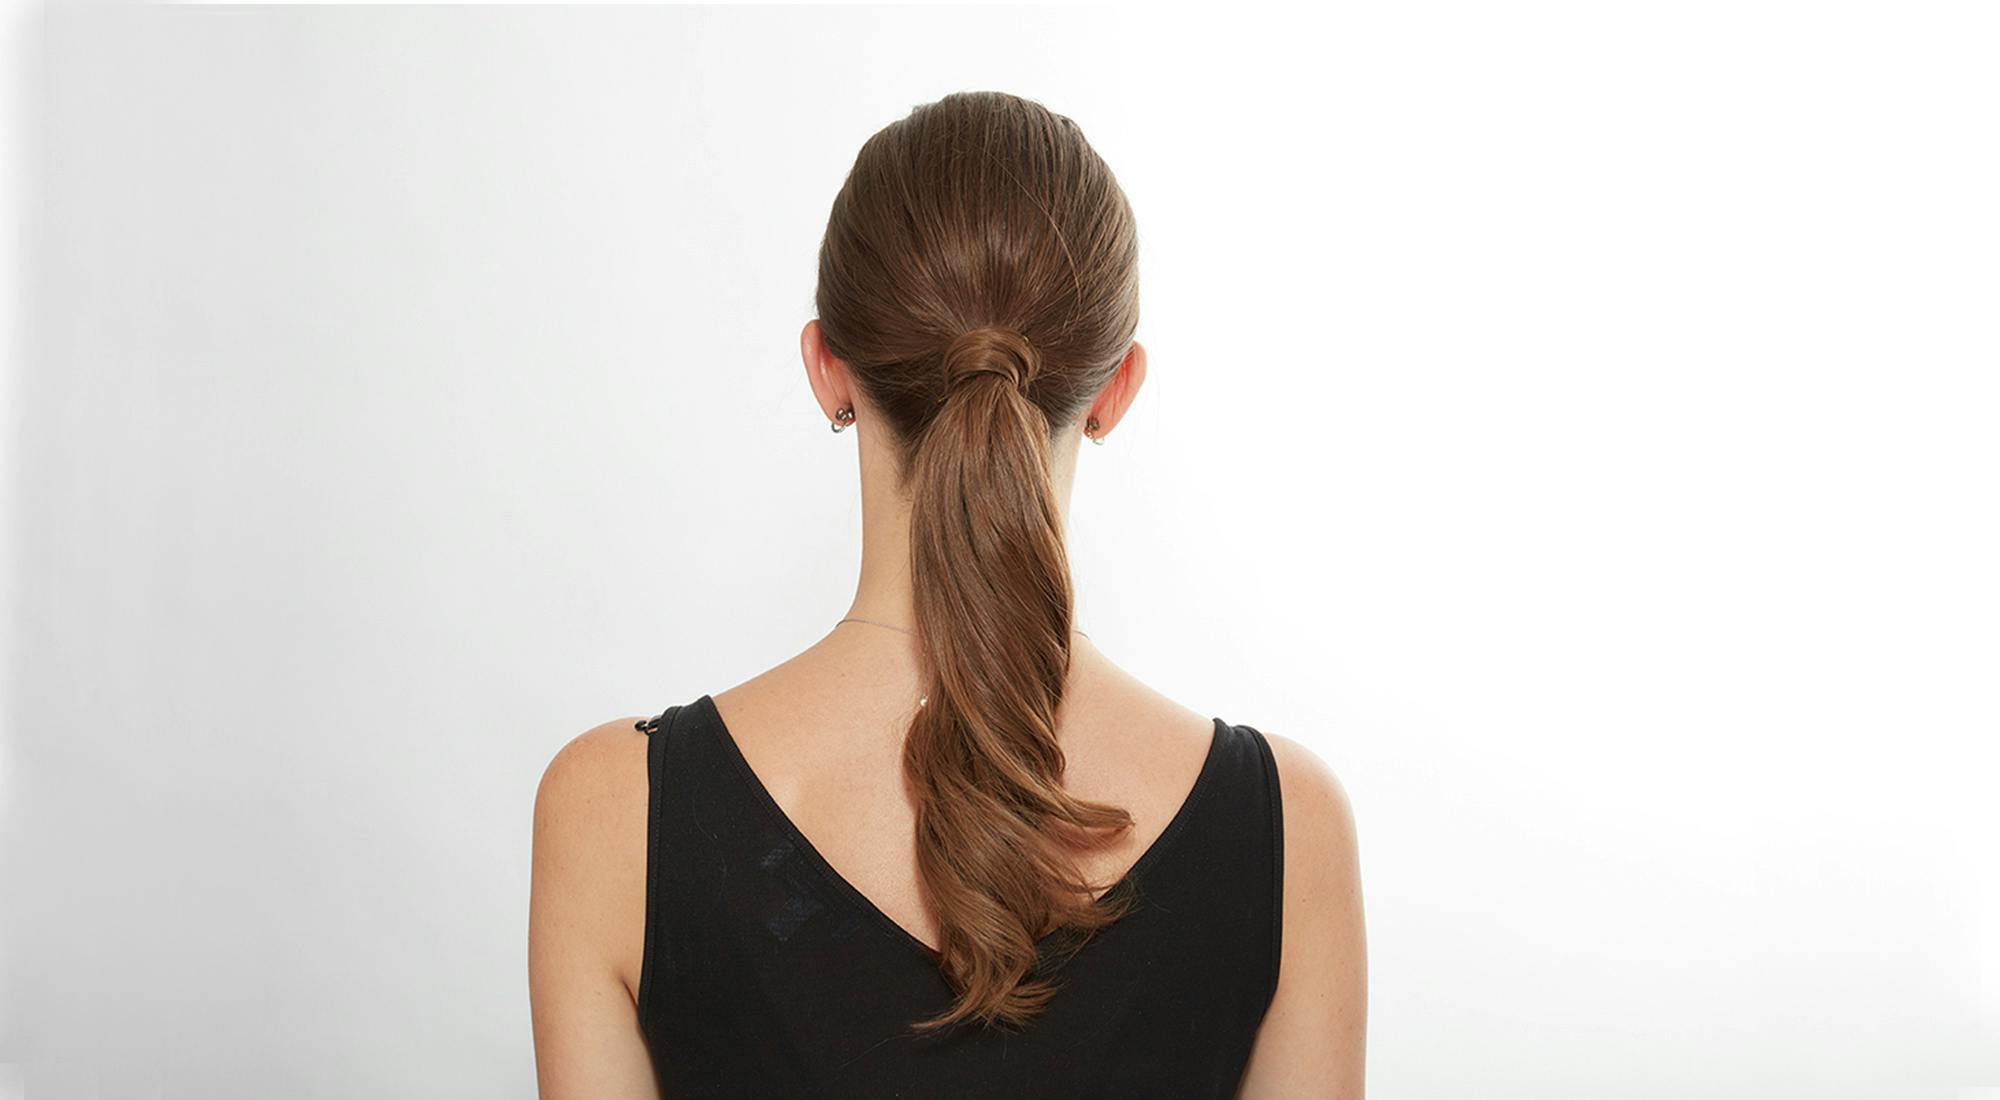 Summer hairstyles: Upscale your ponytail | blow LTD